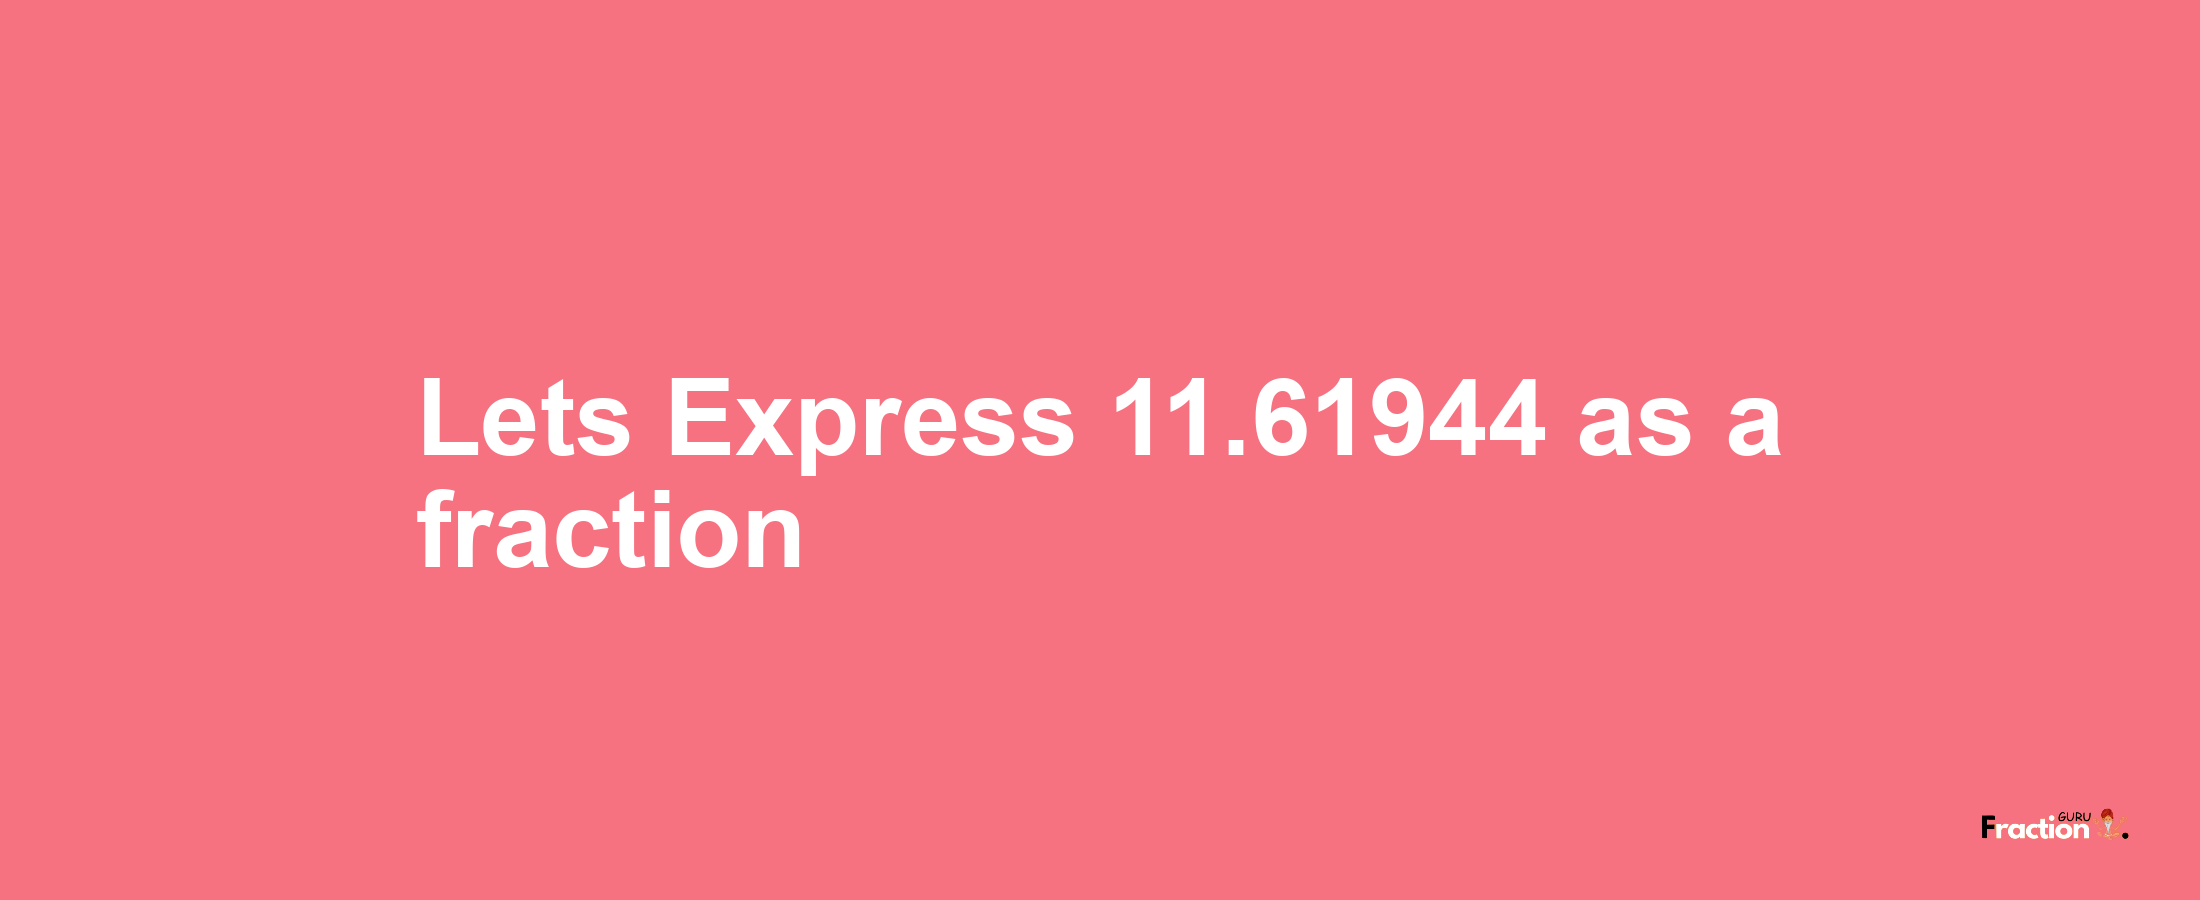 Lets Express 11.61944 as afraction